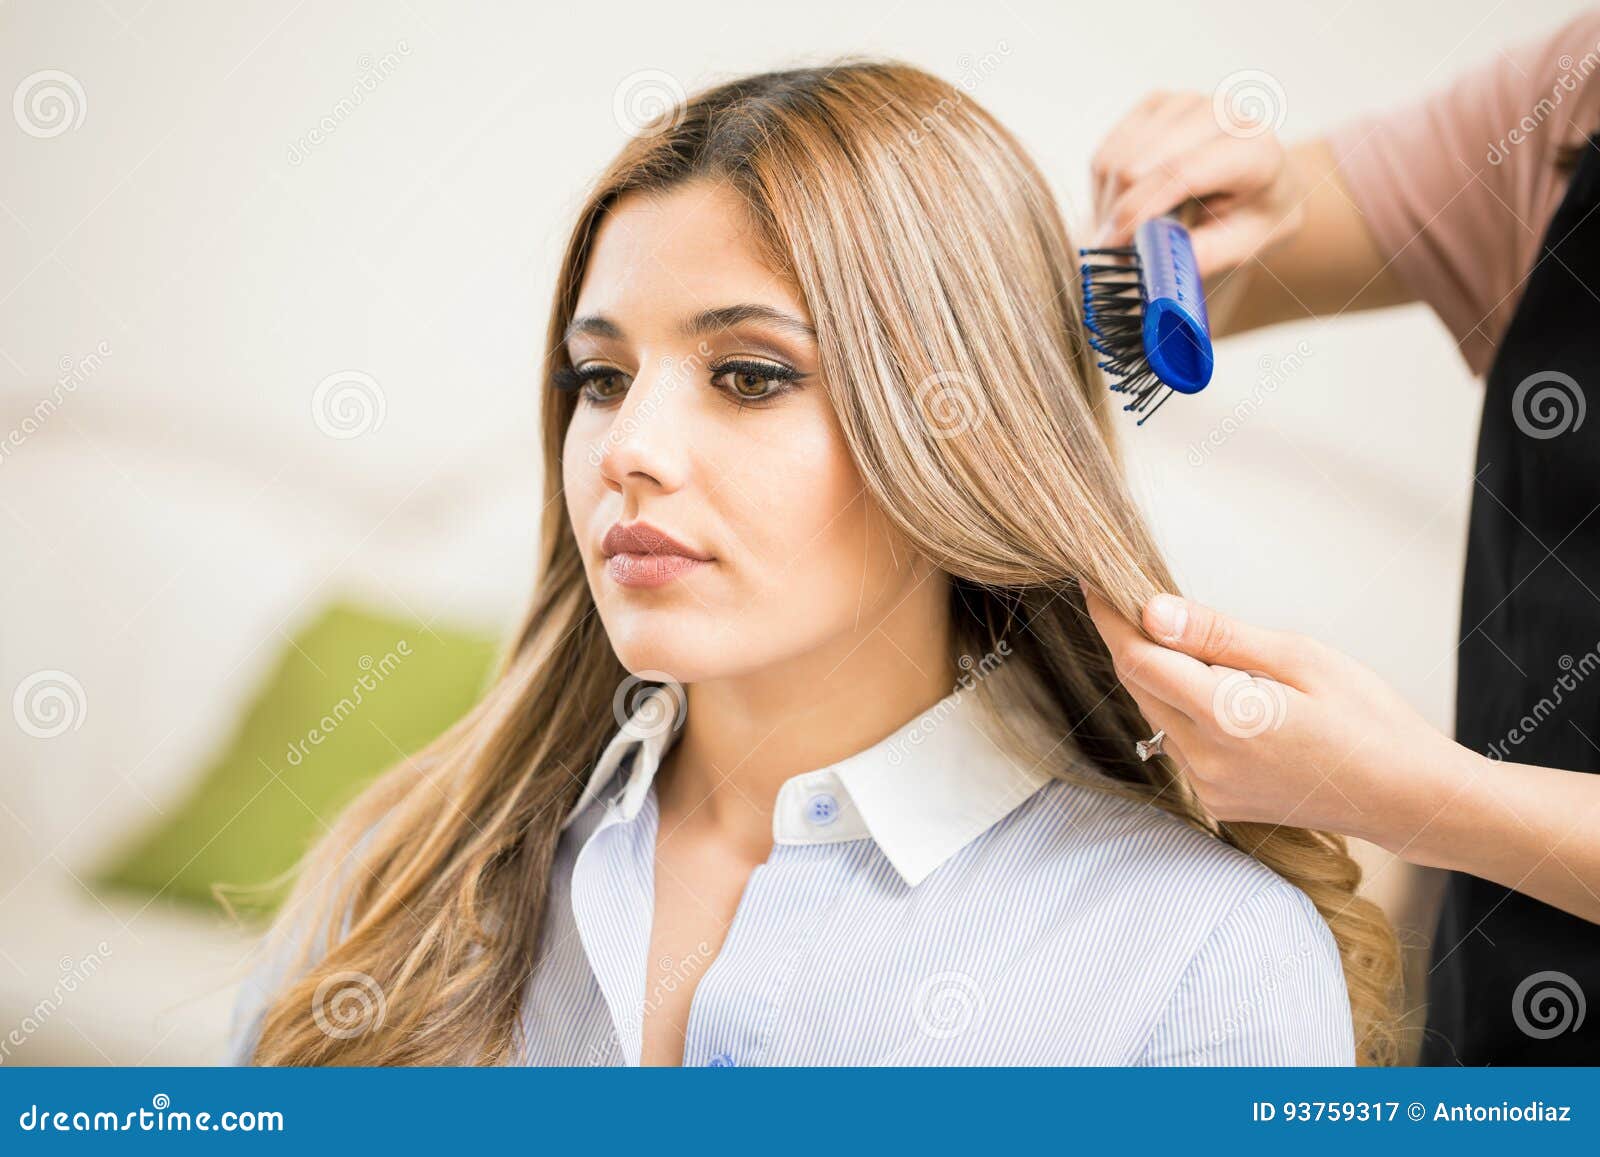 Woman Getting Her Hair Done Stock Image - Image of women, comb: 93759317